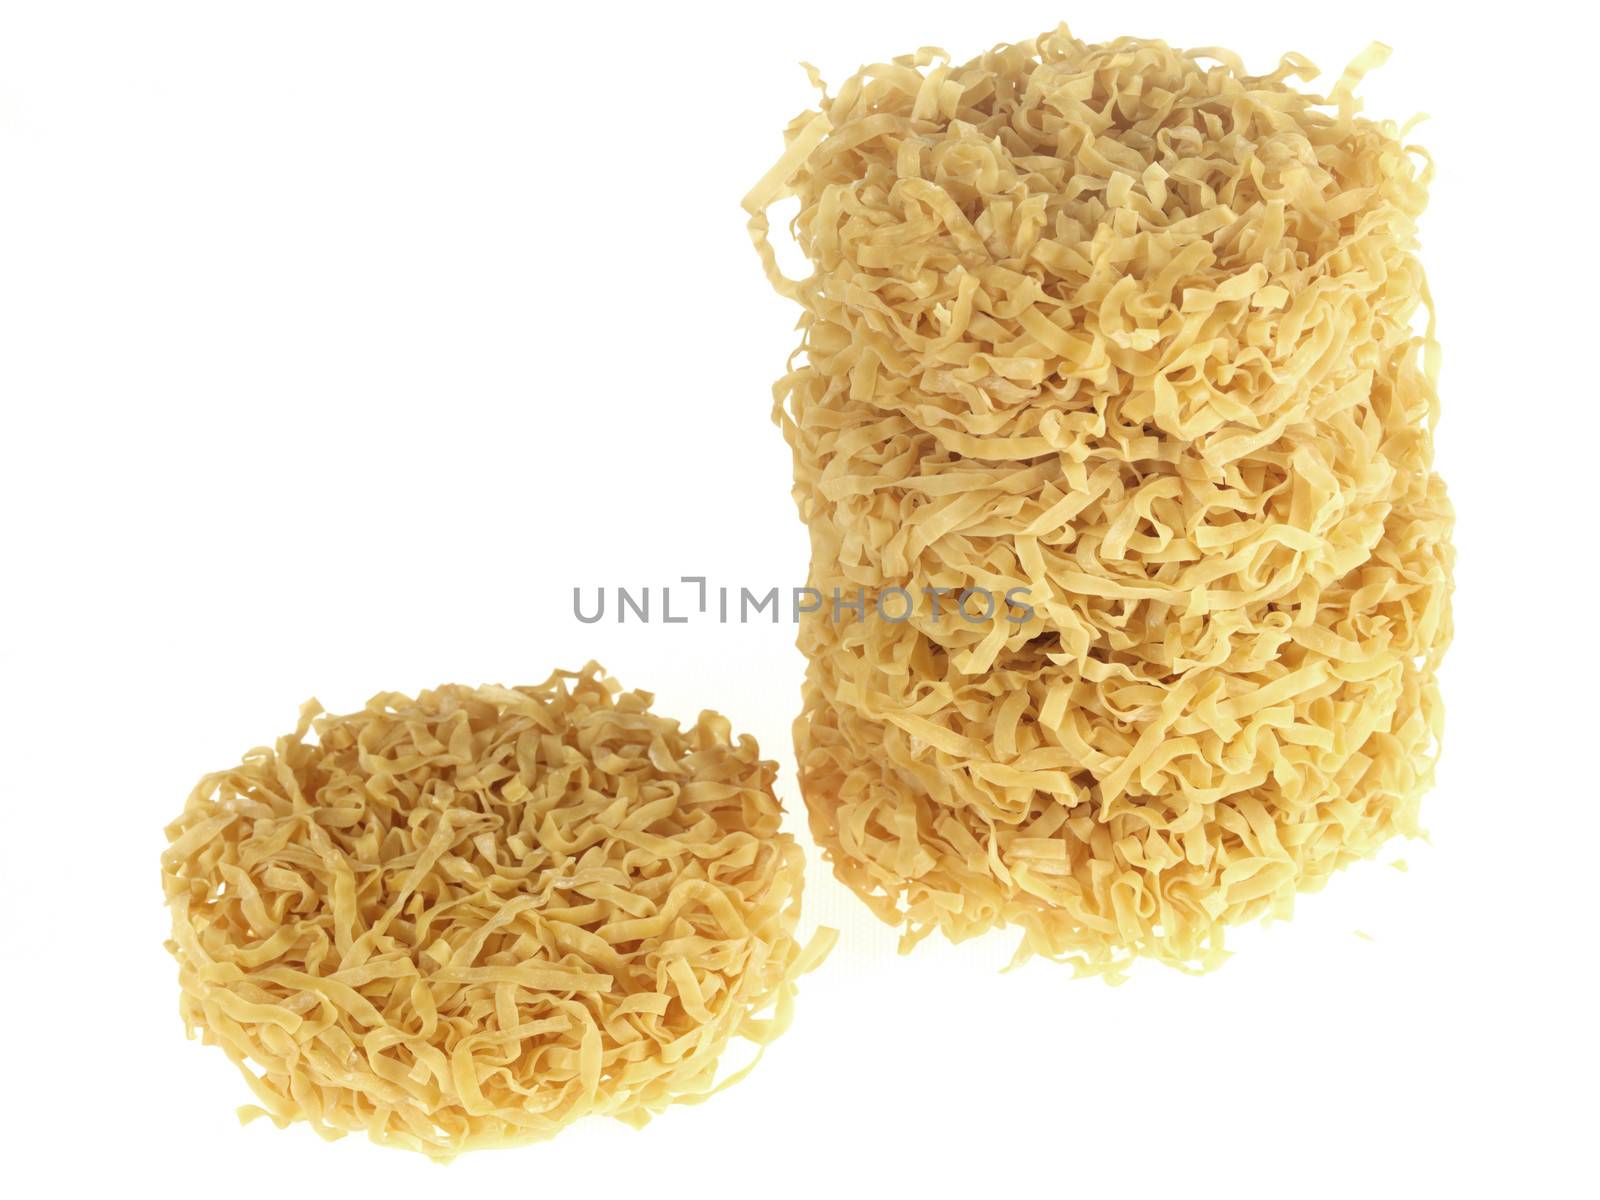 Dried Chinese Noodles by Whiteboxmedia